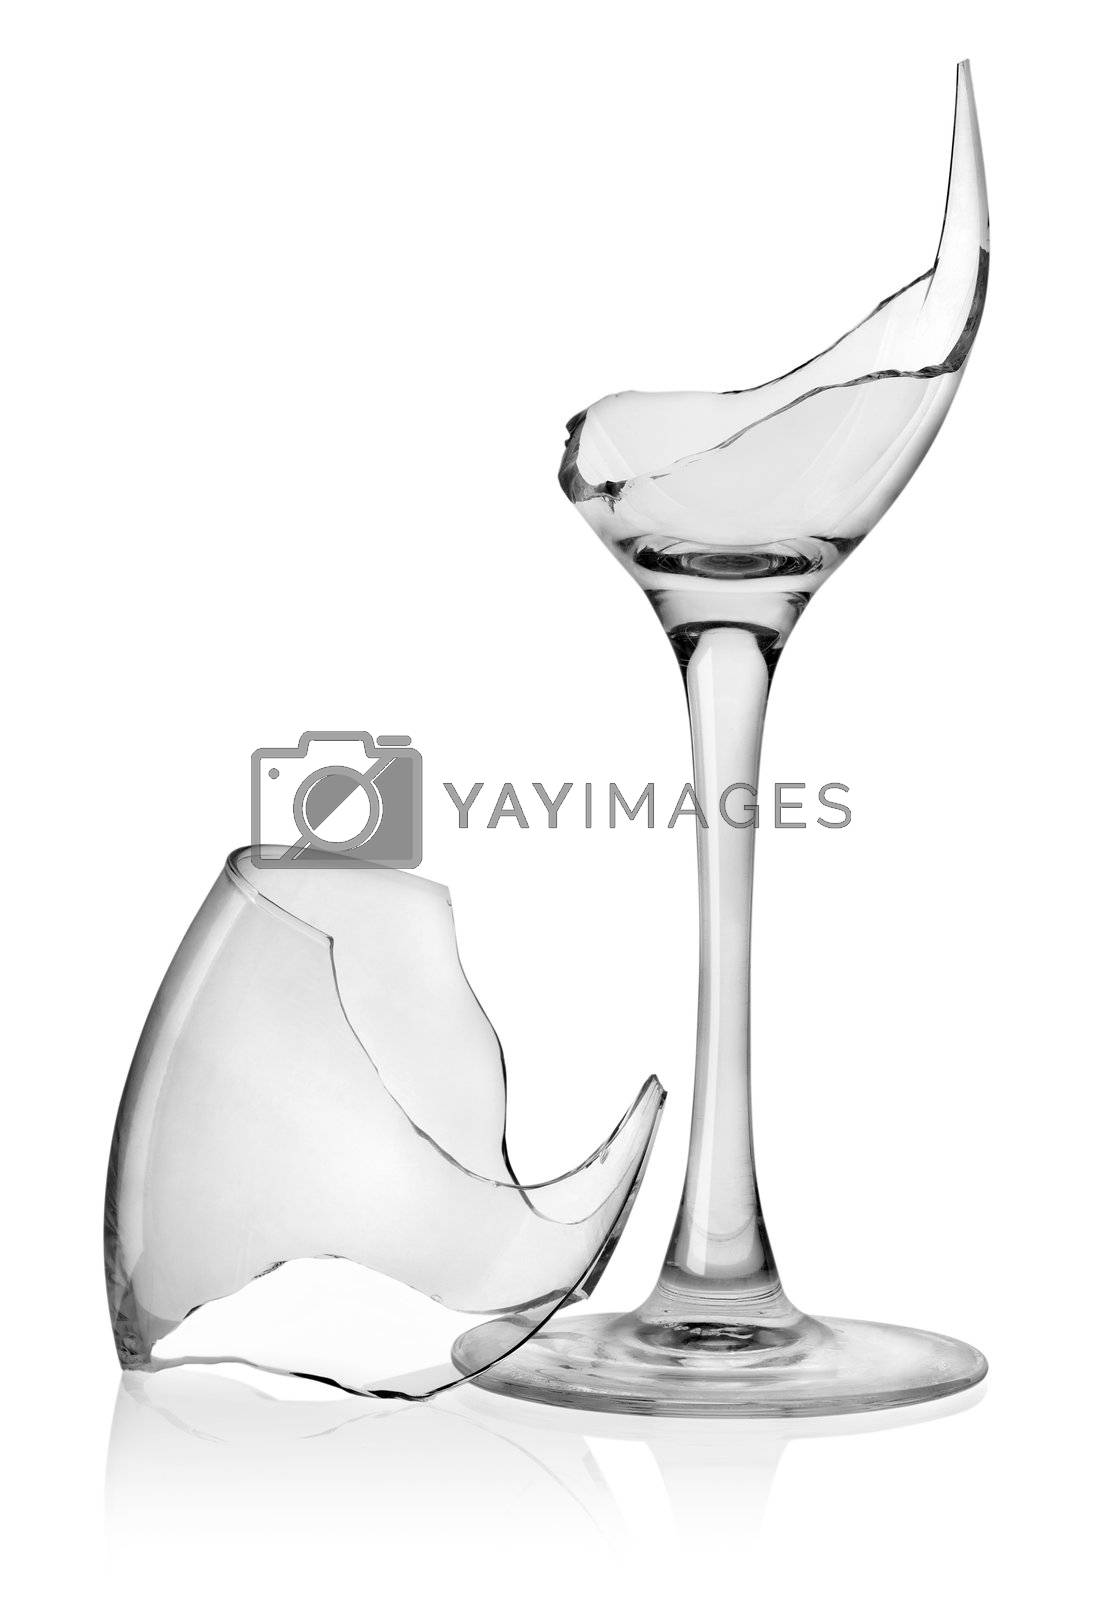 Royalty free image of Broken wine glass by Givaga